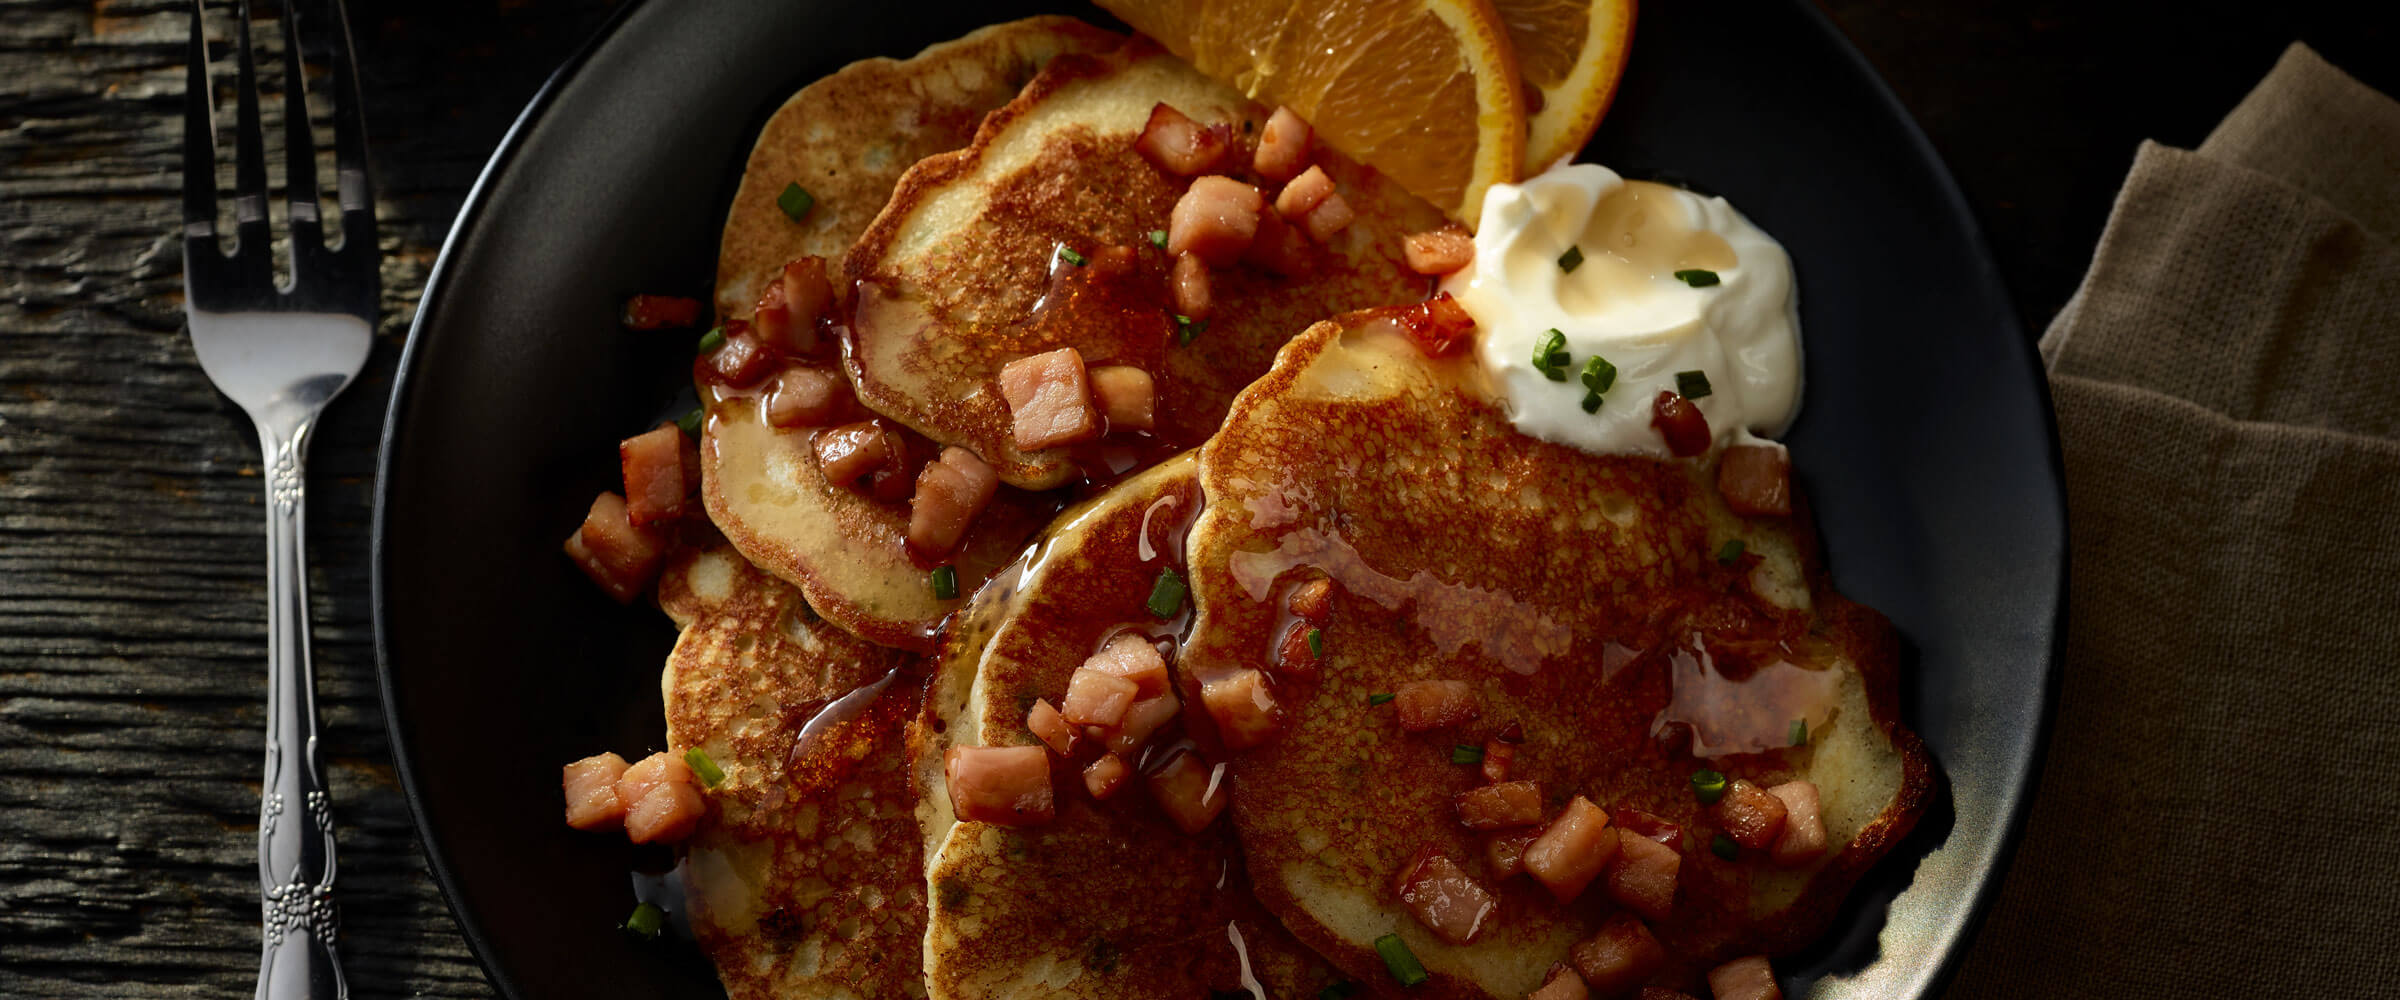 Canadian Bacon Pancakes topped with chives on black plate